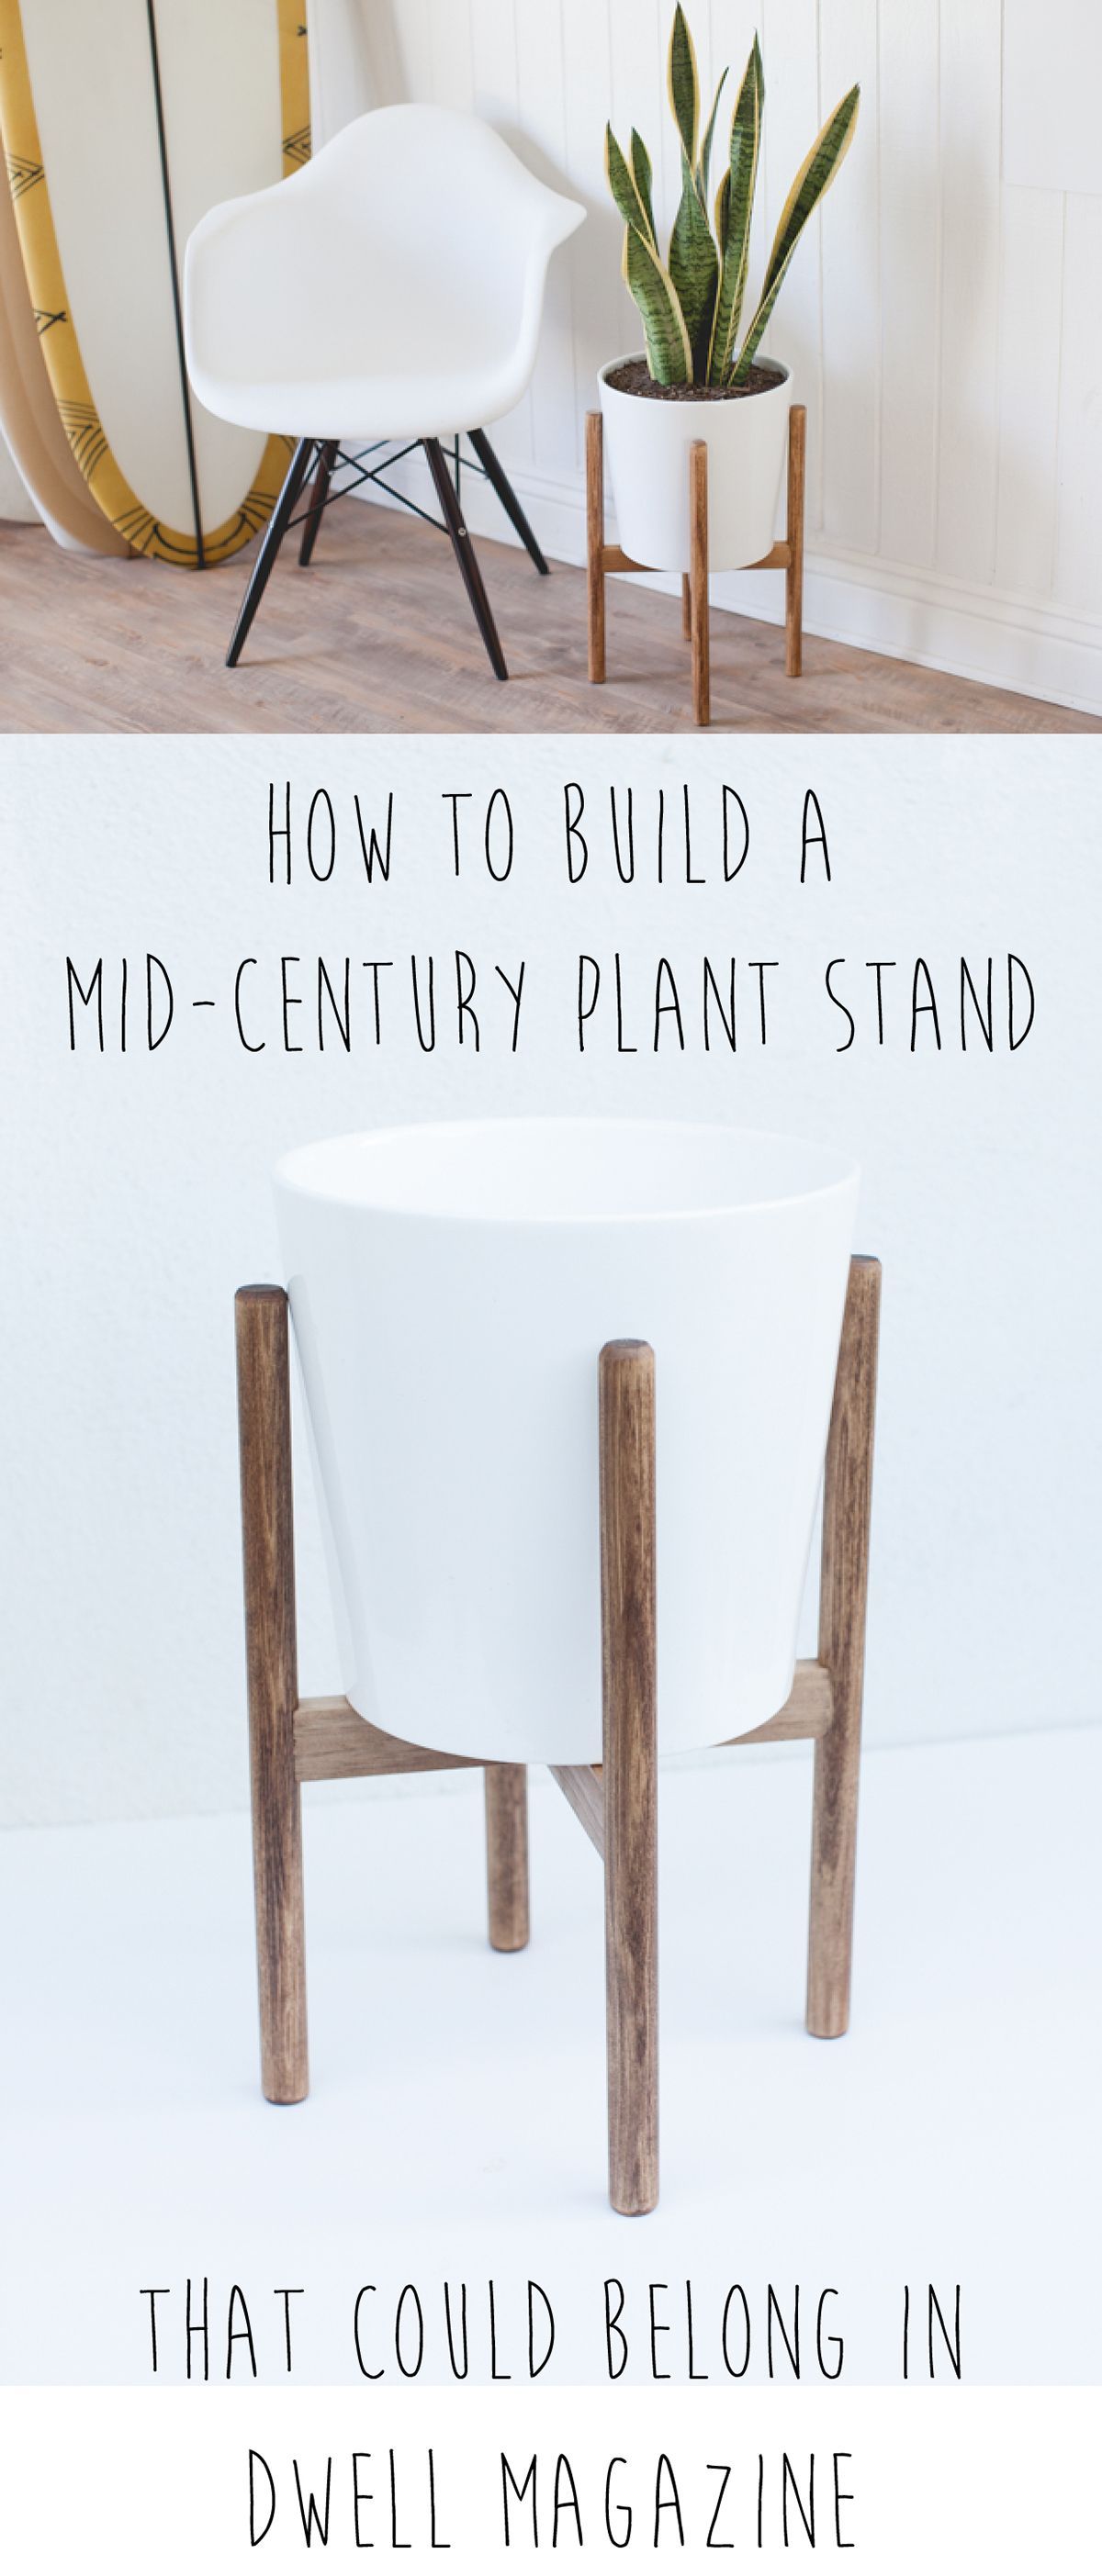 How to Build a Midcentury-Inspired Plant Stand -   14 modern plants Stand ideas